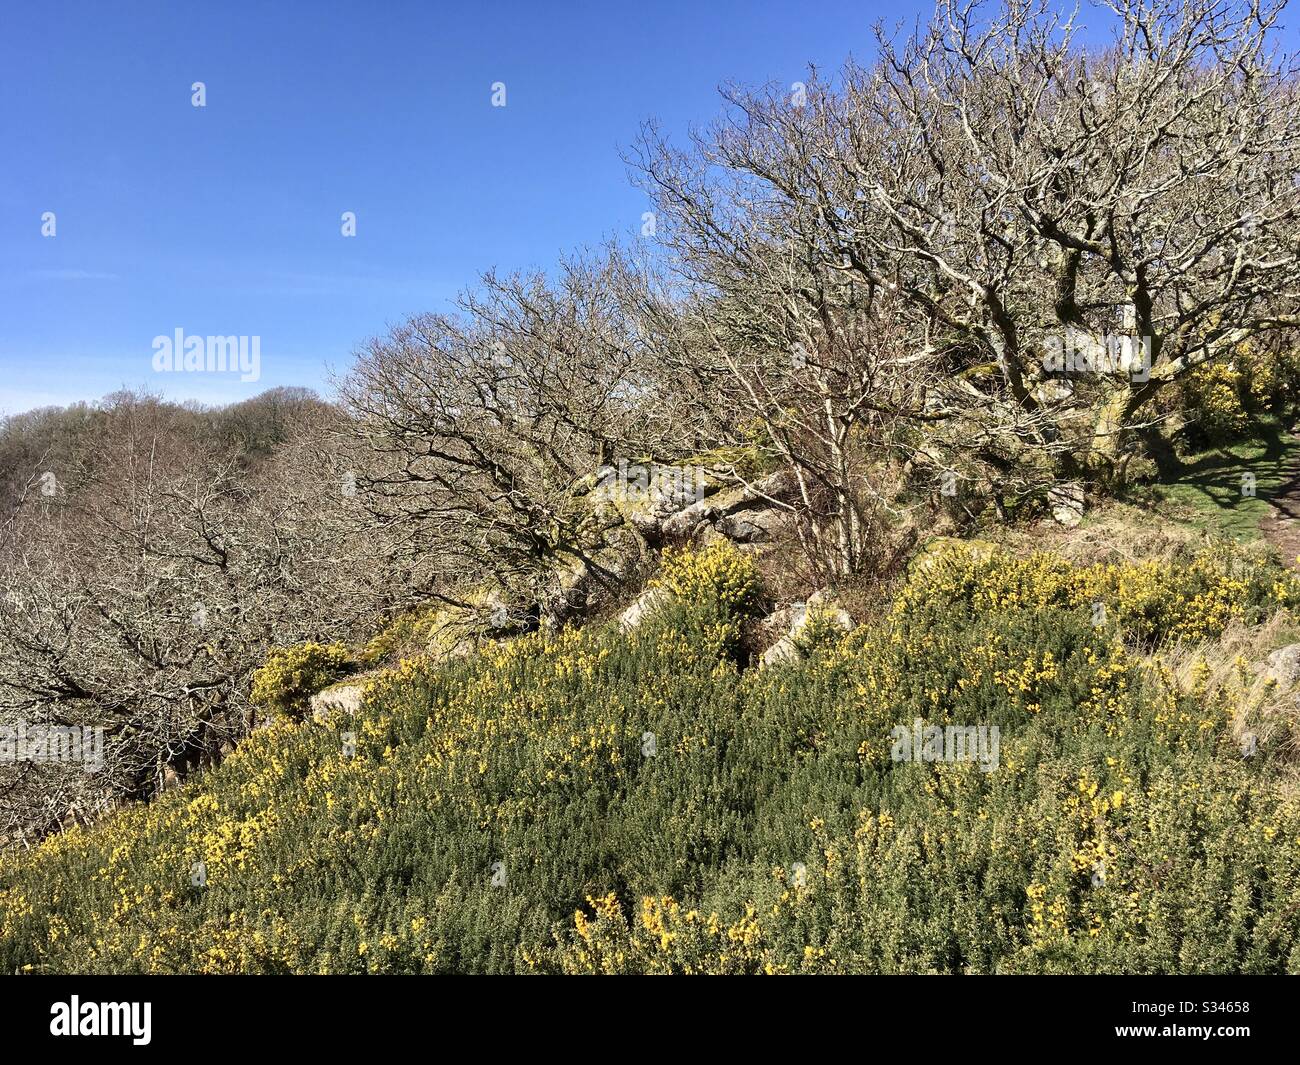 Scrubby trees and yellow gorse in flower under a blue sky Stock Photo